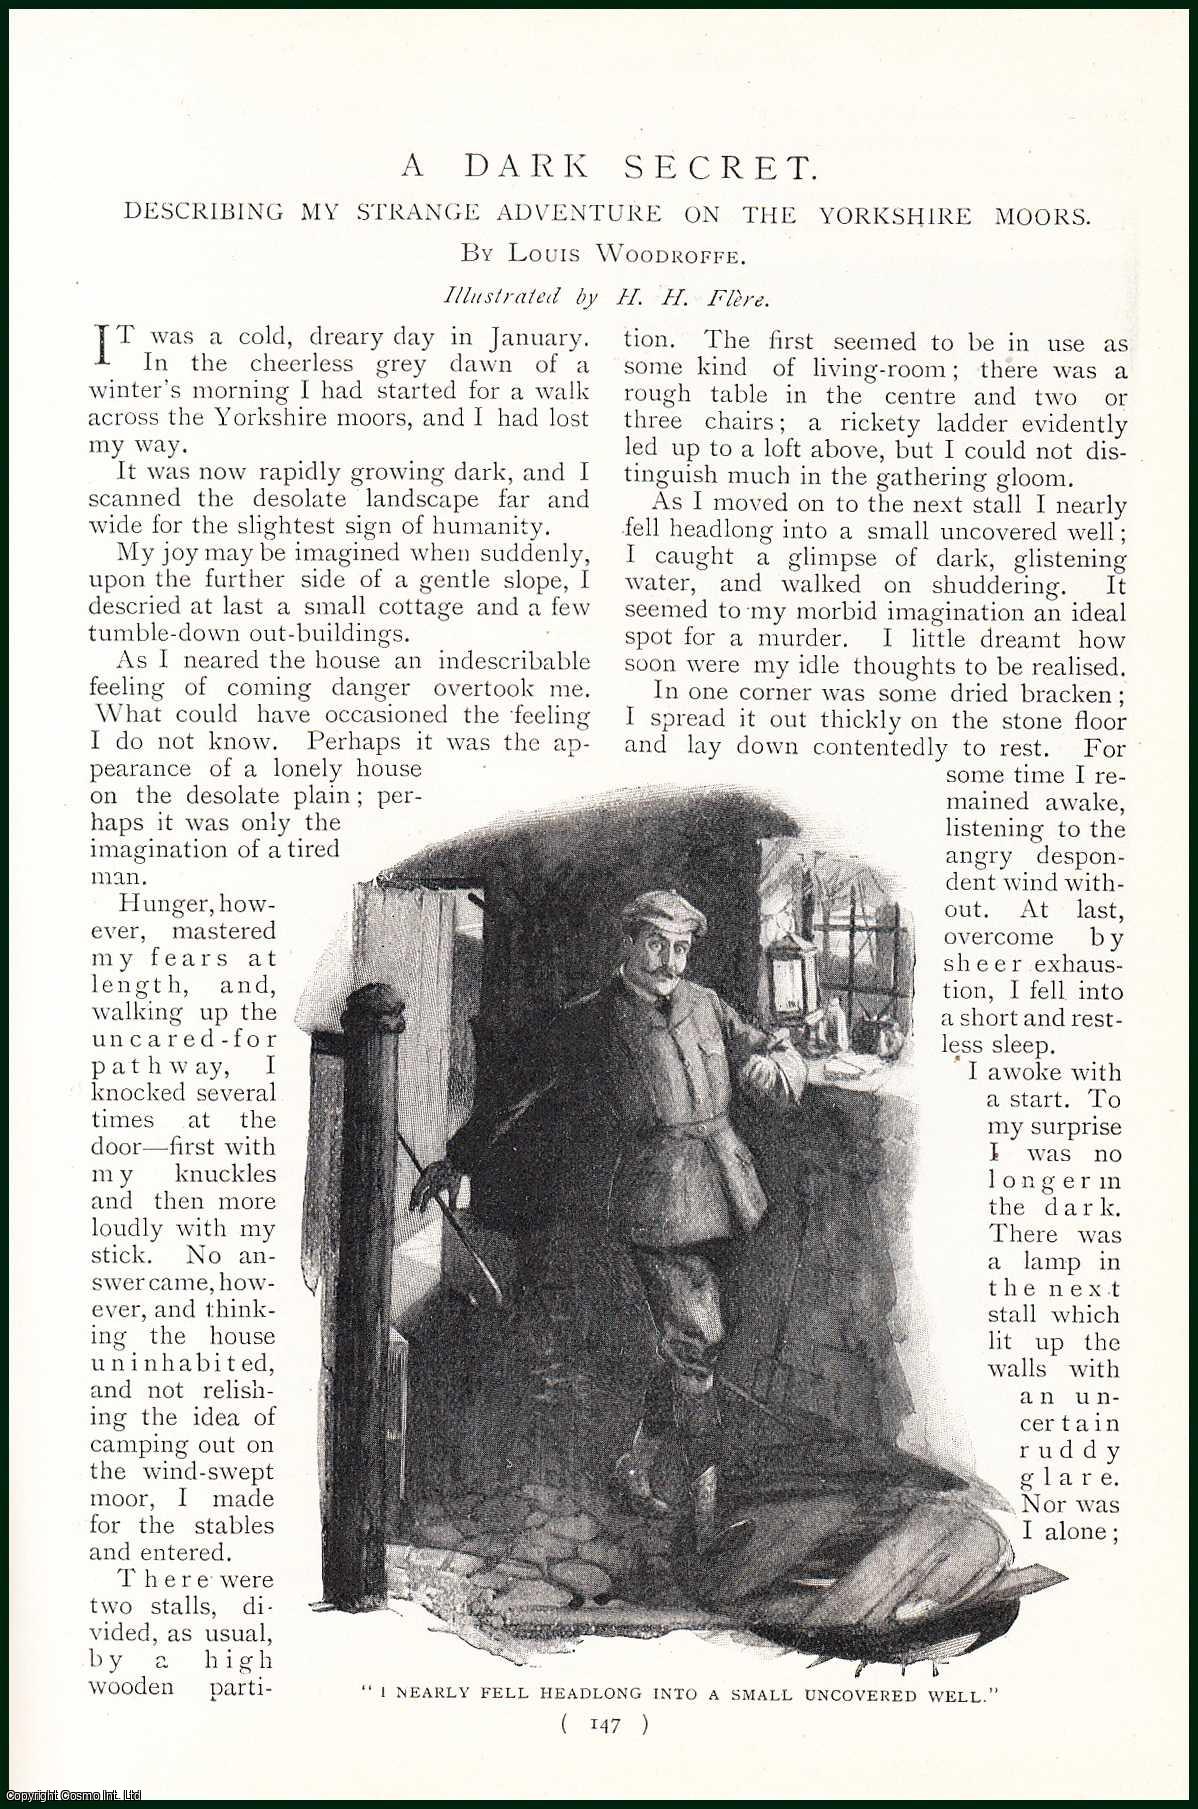 Louis Woodroffe, illustrated by H.H. Flere. - A Dark Secret. Describing My Strange Adventure On The Yorkshire Moors. An uncommon original article from the Harmsworth London Magazine, 1900.